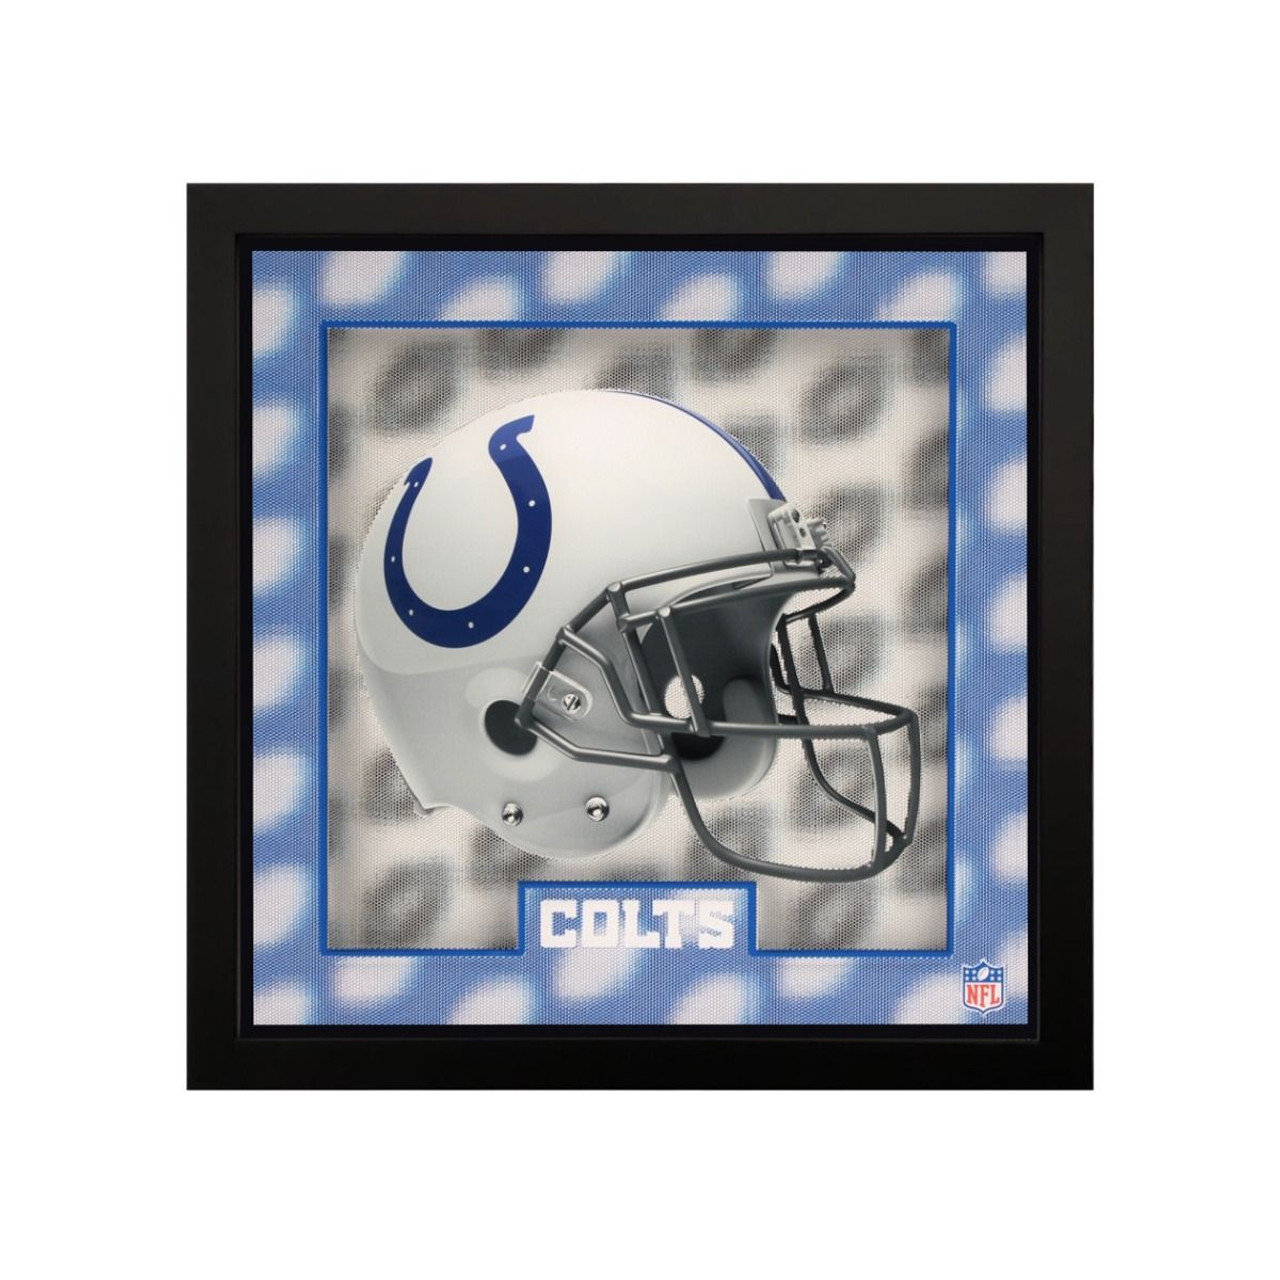 Indianapolis, IND, Indy, Colts, 5D, Holographic, Wall, Art, 12"x12", NFL, Imperial, 720801139937,   588-1022